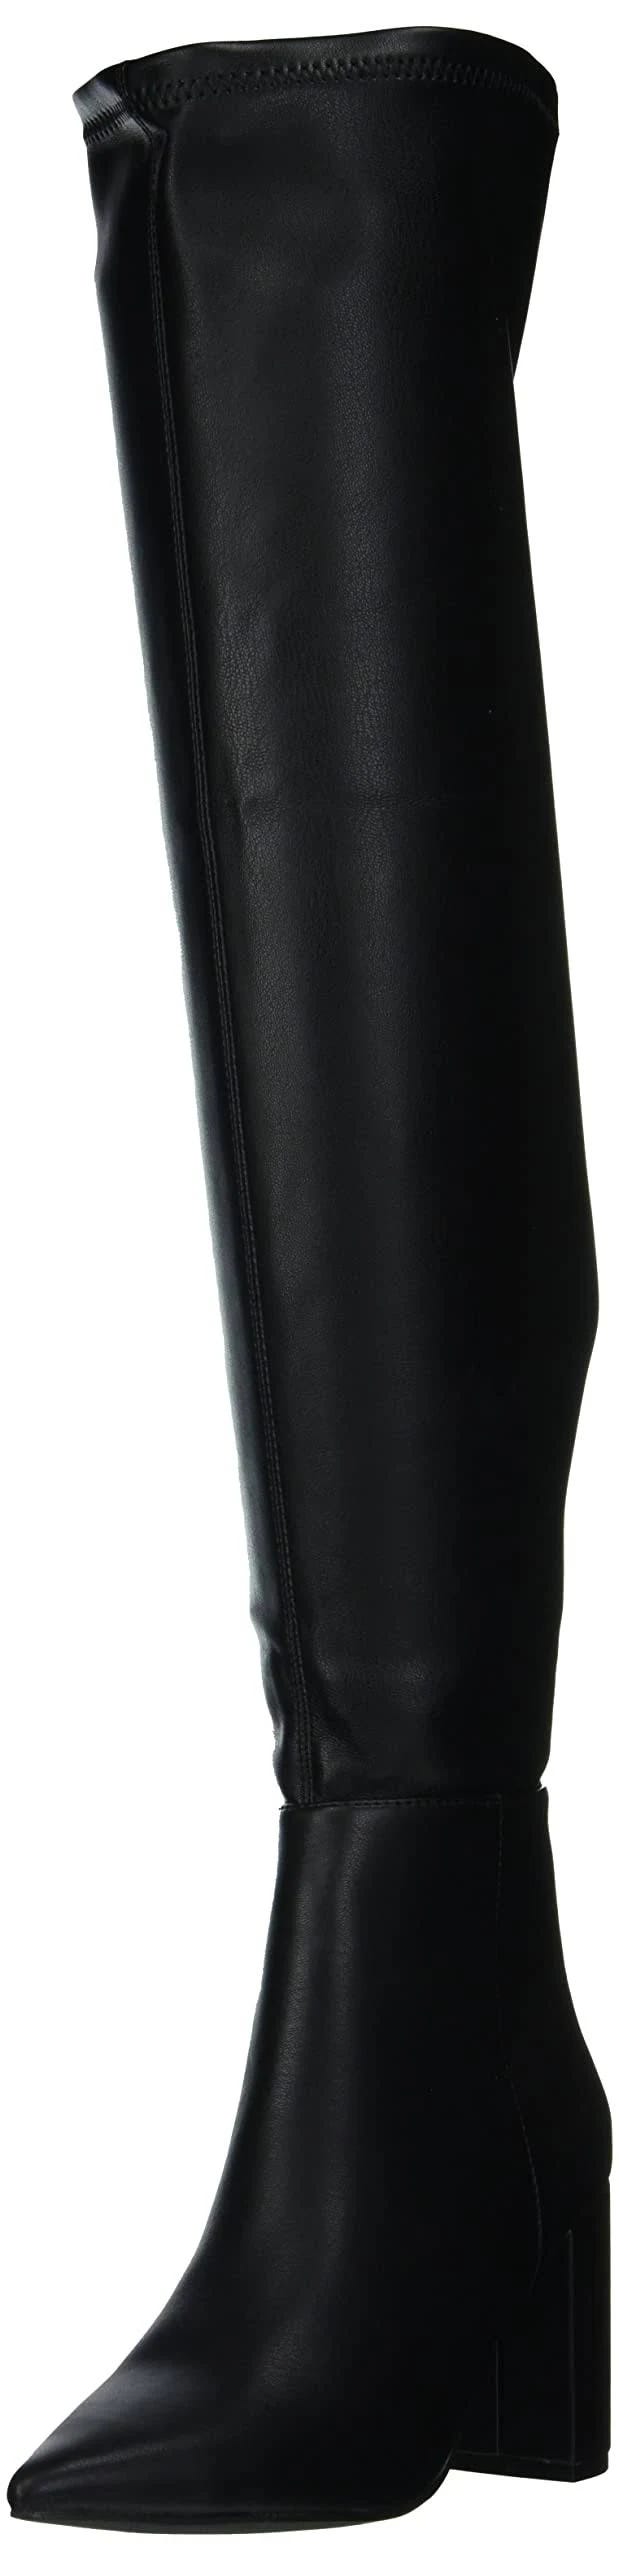 Chic Over-the-Knee Black Stretch Heel Boots | Image